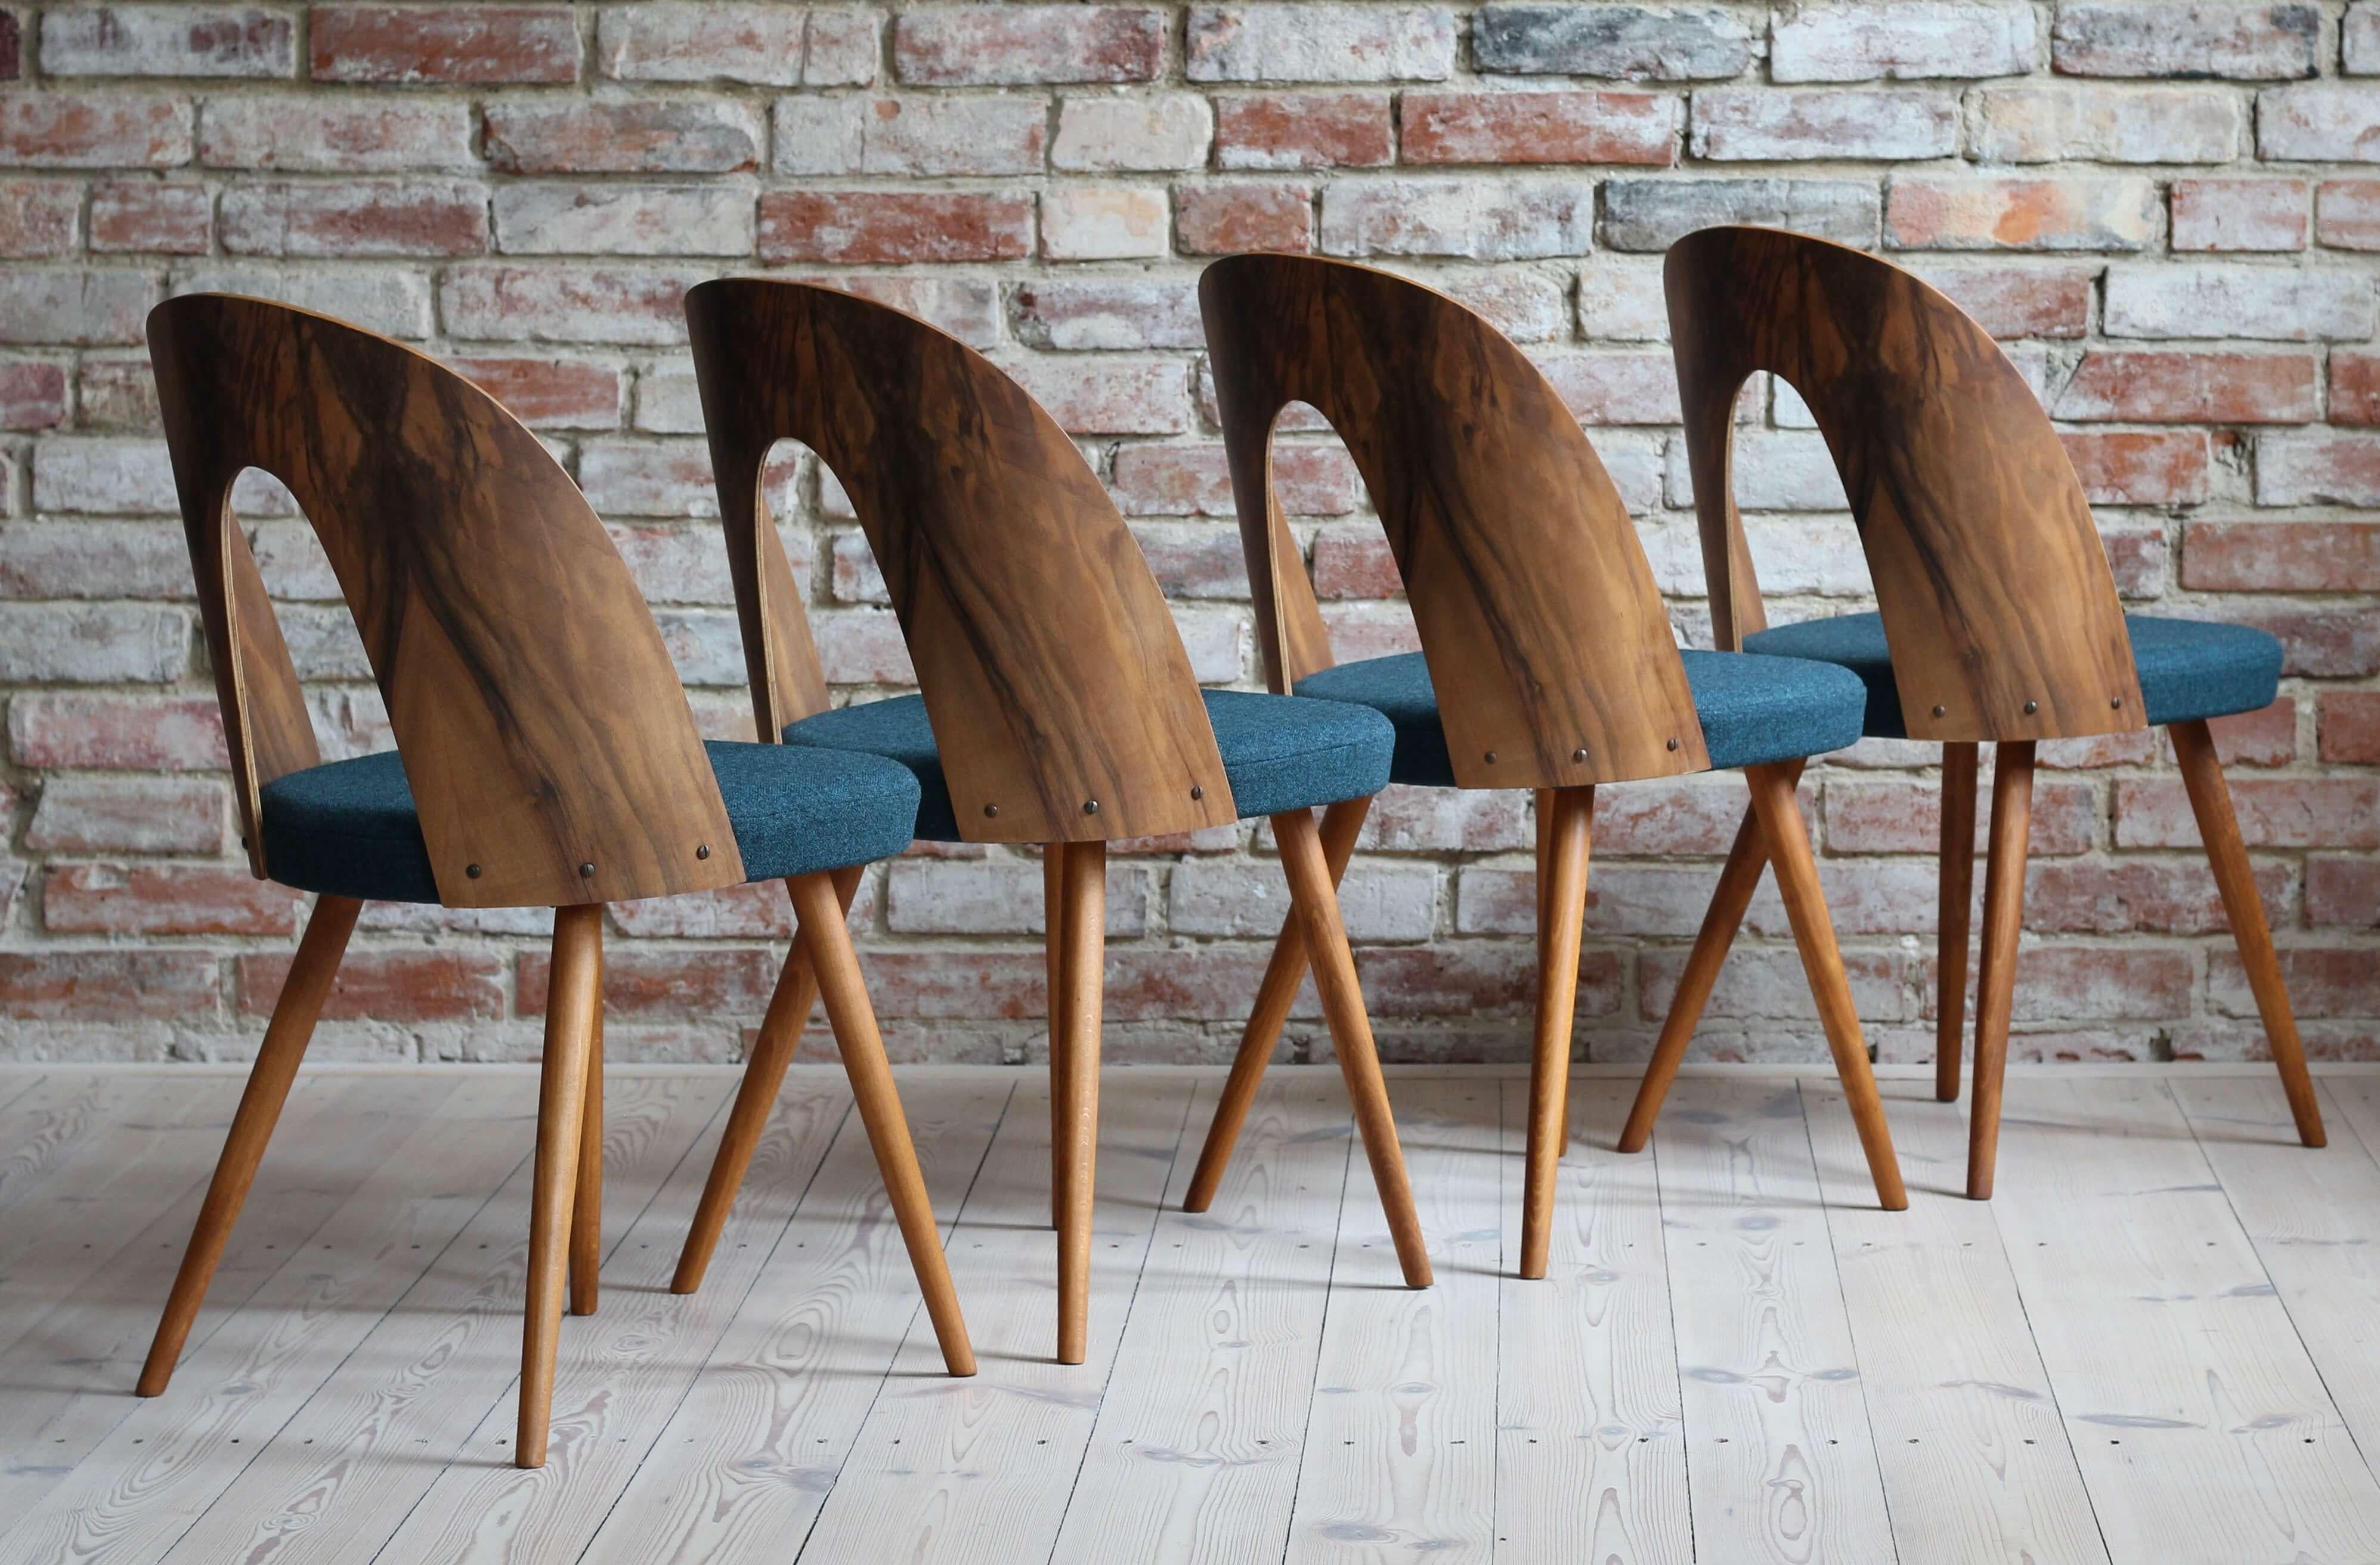 Oiled Set of 4 Midcentury Walnut Dining Chairs by A. Šuman, KVADRAT Reupholstery